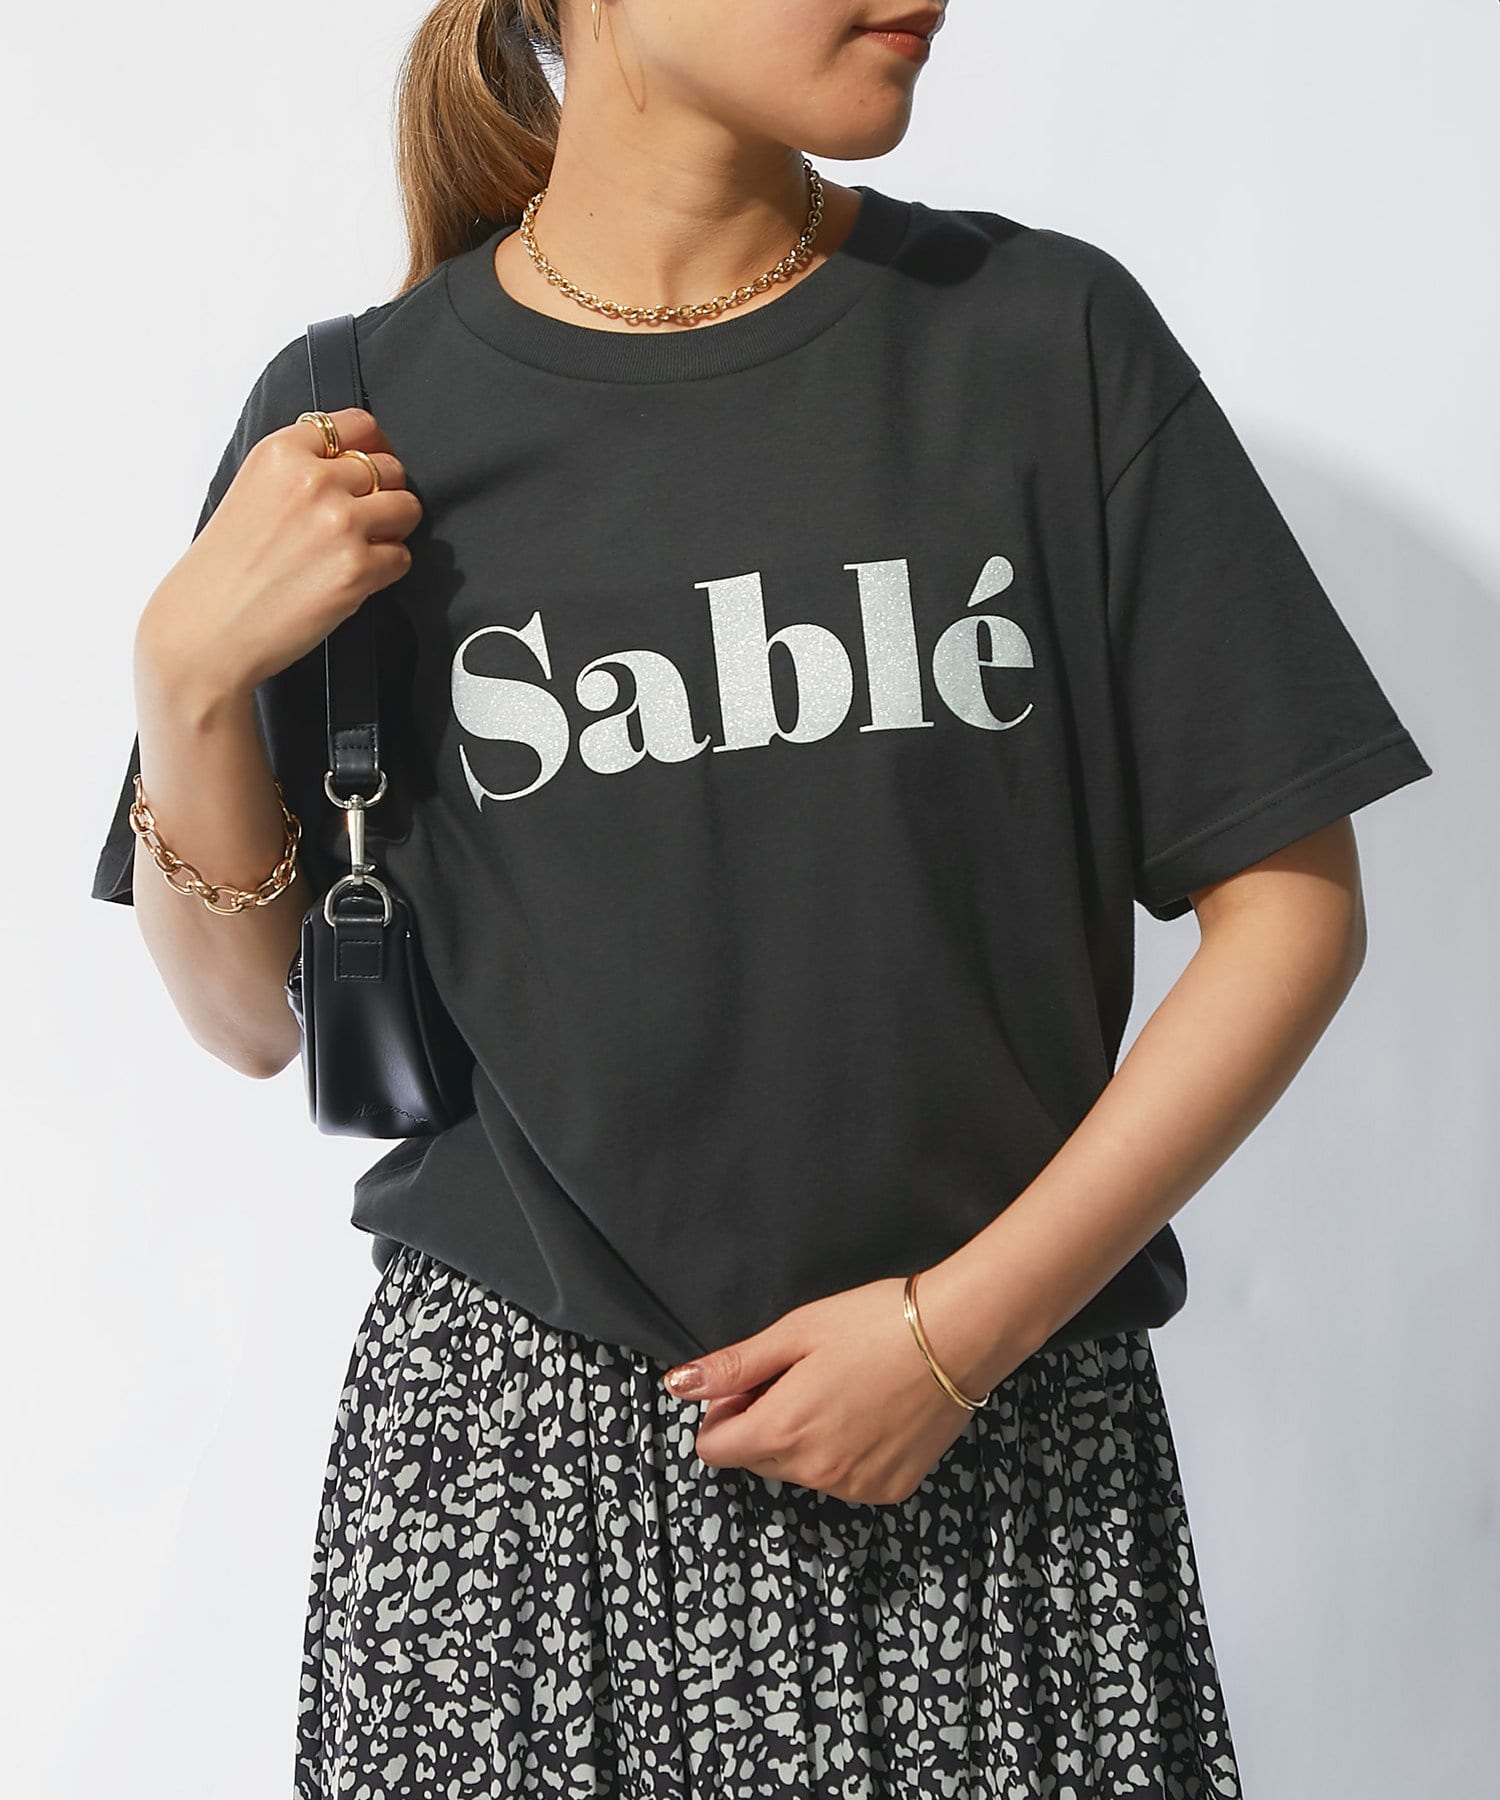 un dix cors(アンディコール) 《光沢感プリントが高見え》Sable箔プリントTee